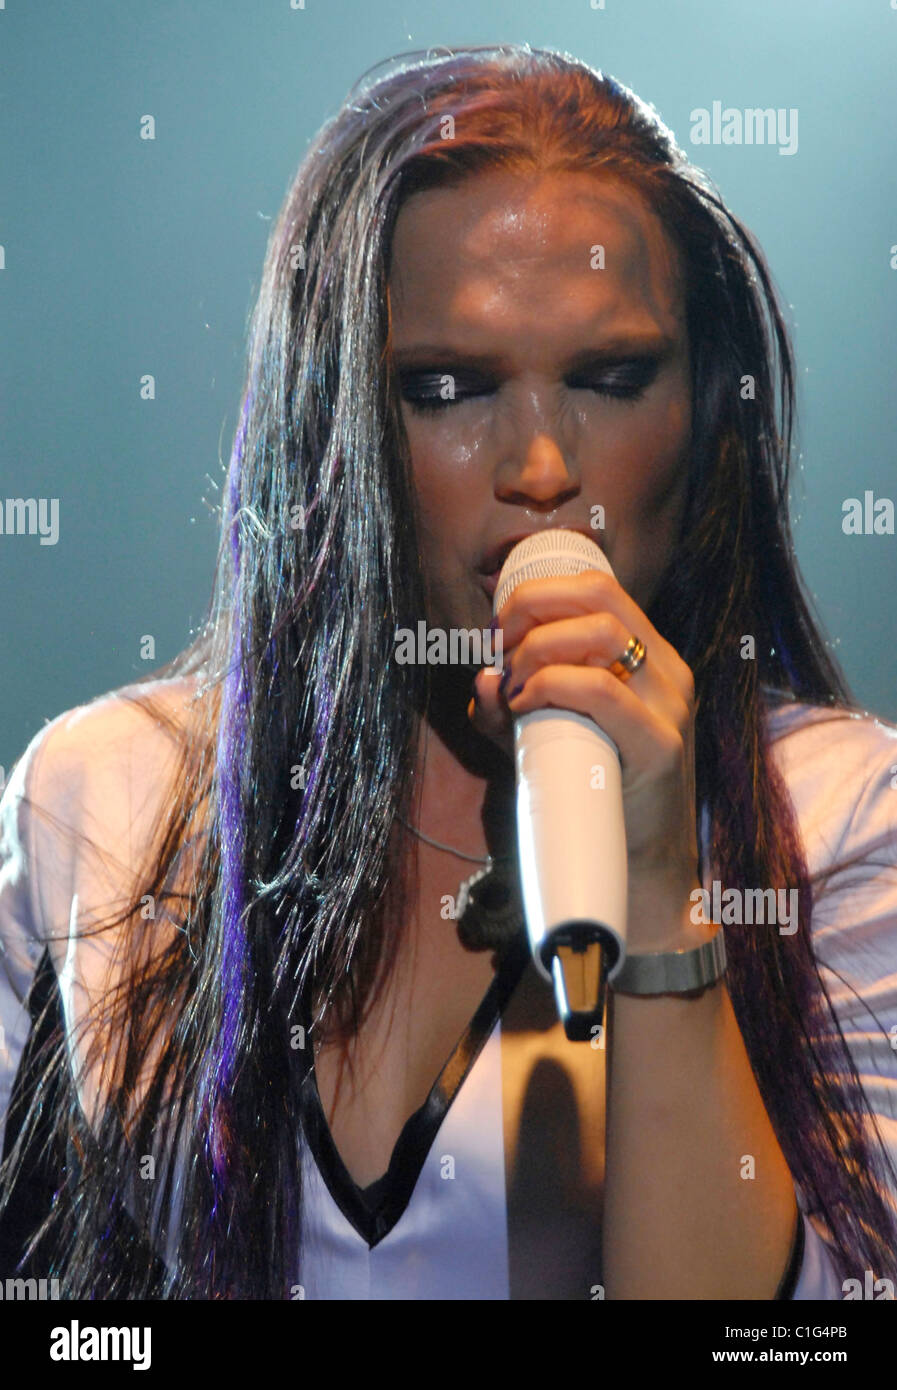 Finnish Former Nightwish singer Tarja Turunen performing live on stage at the 'El Teatro de Flores' Buenos Aires, Argentina - Stock Photo